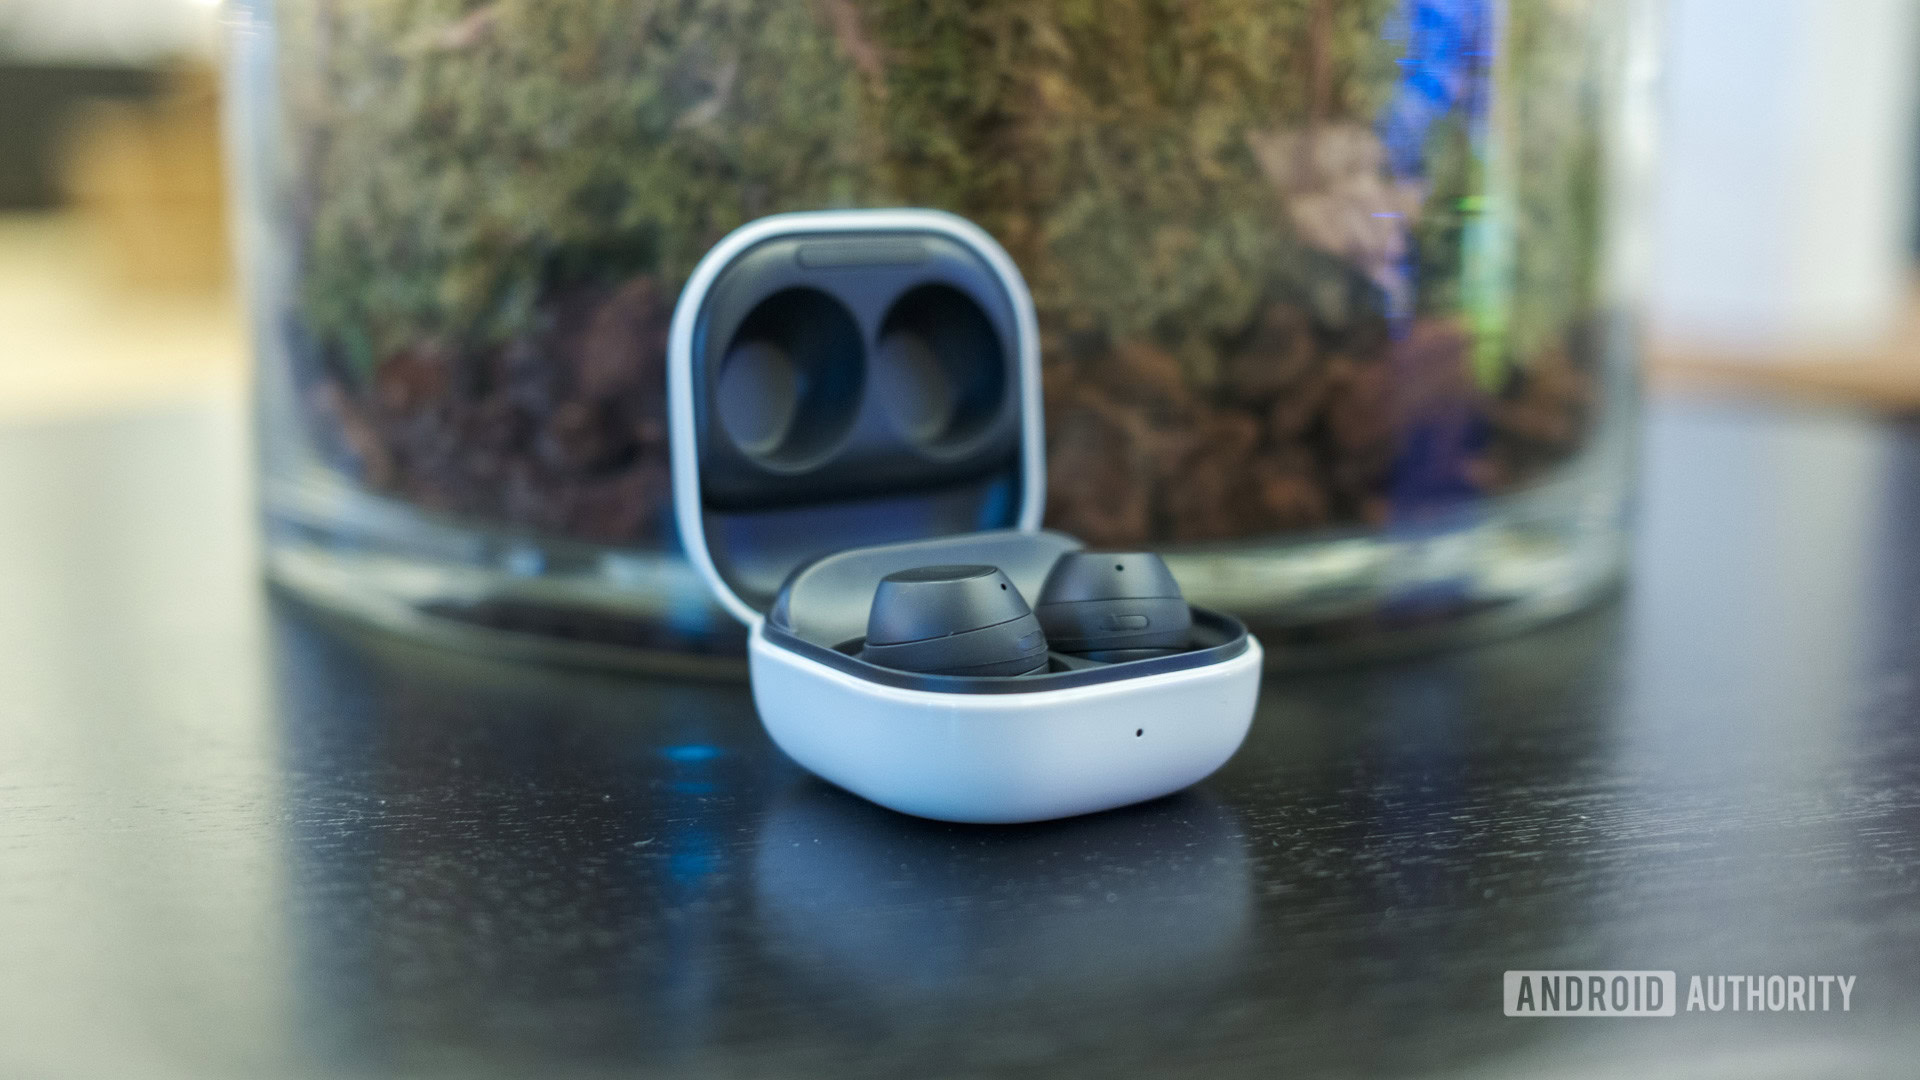 Samsung’s own app leaks major redesign of Galaxy Buds 3